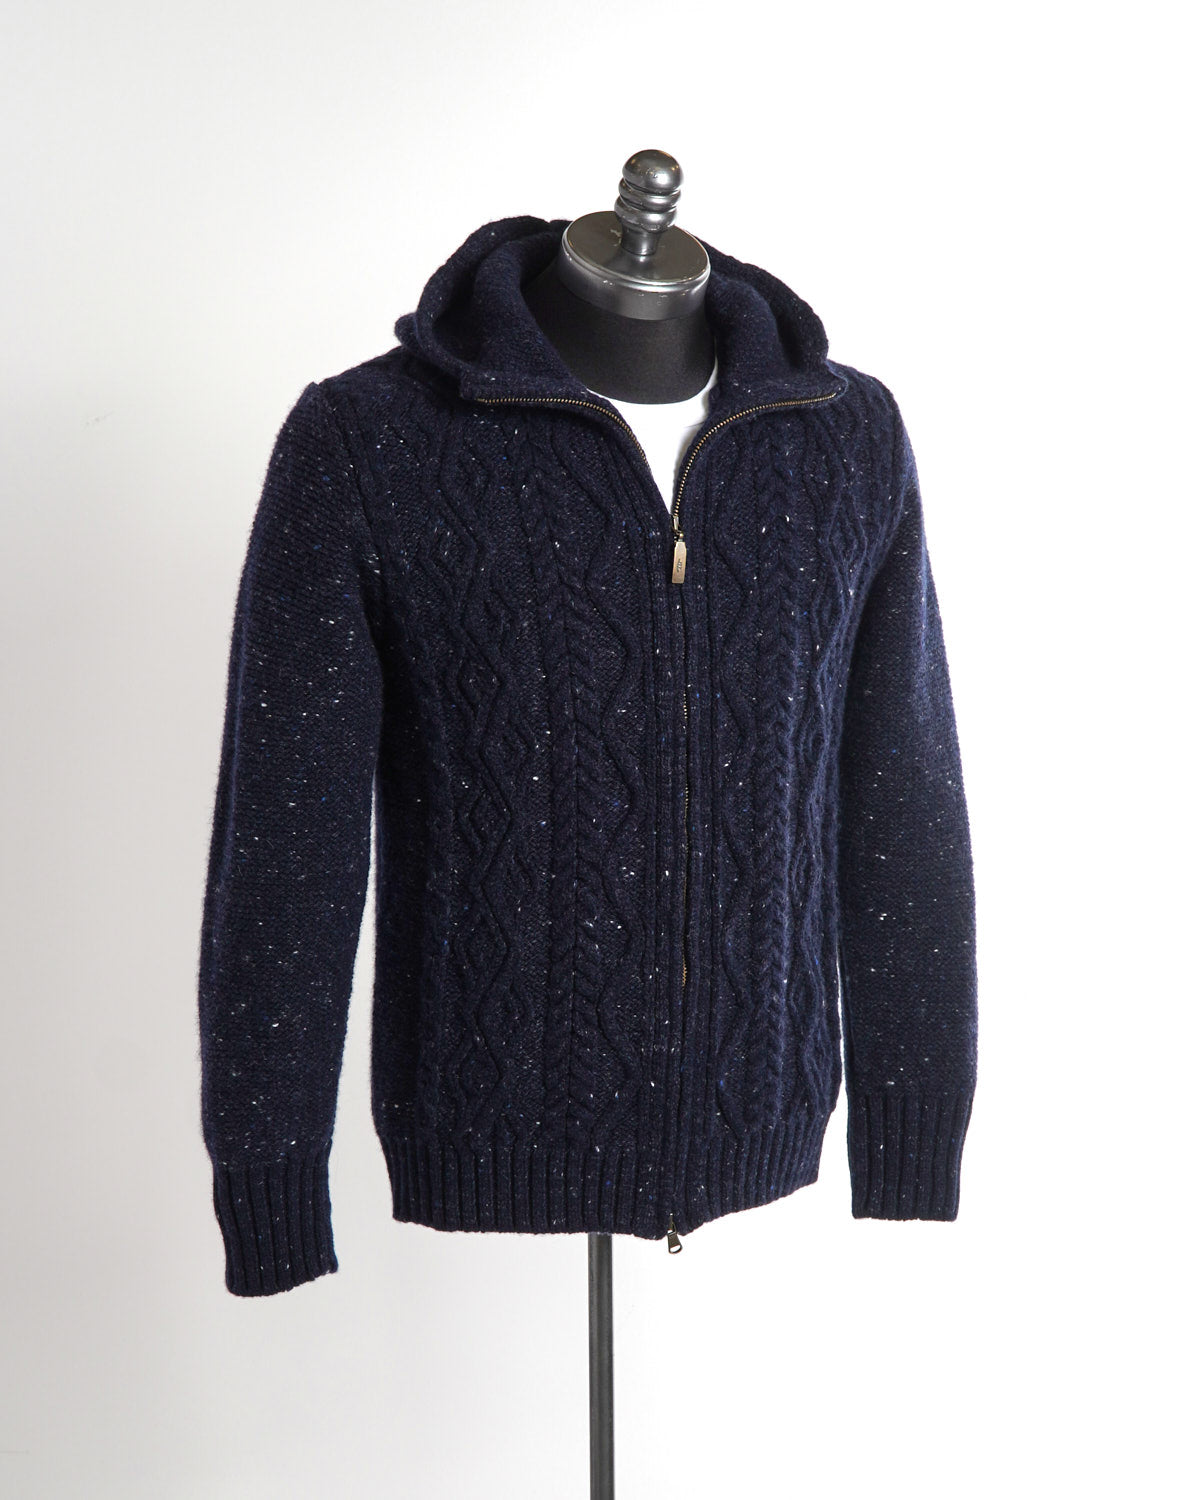 Inis Meáin Wool Cashmere Donegal Aran Cable Crewneck Sweater